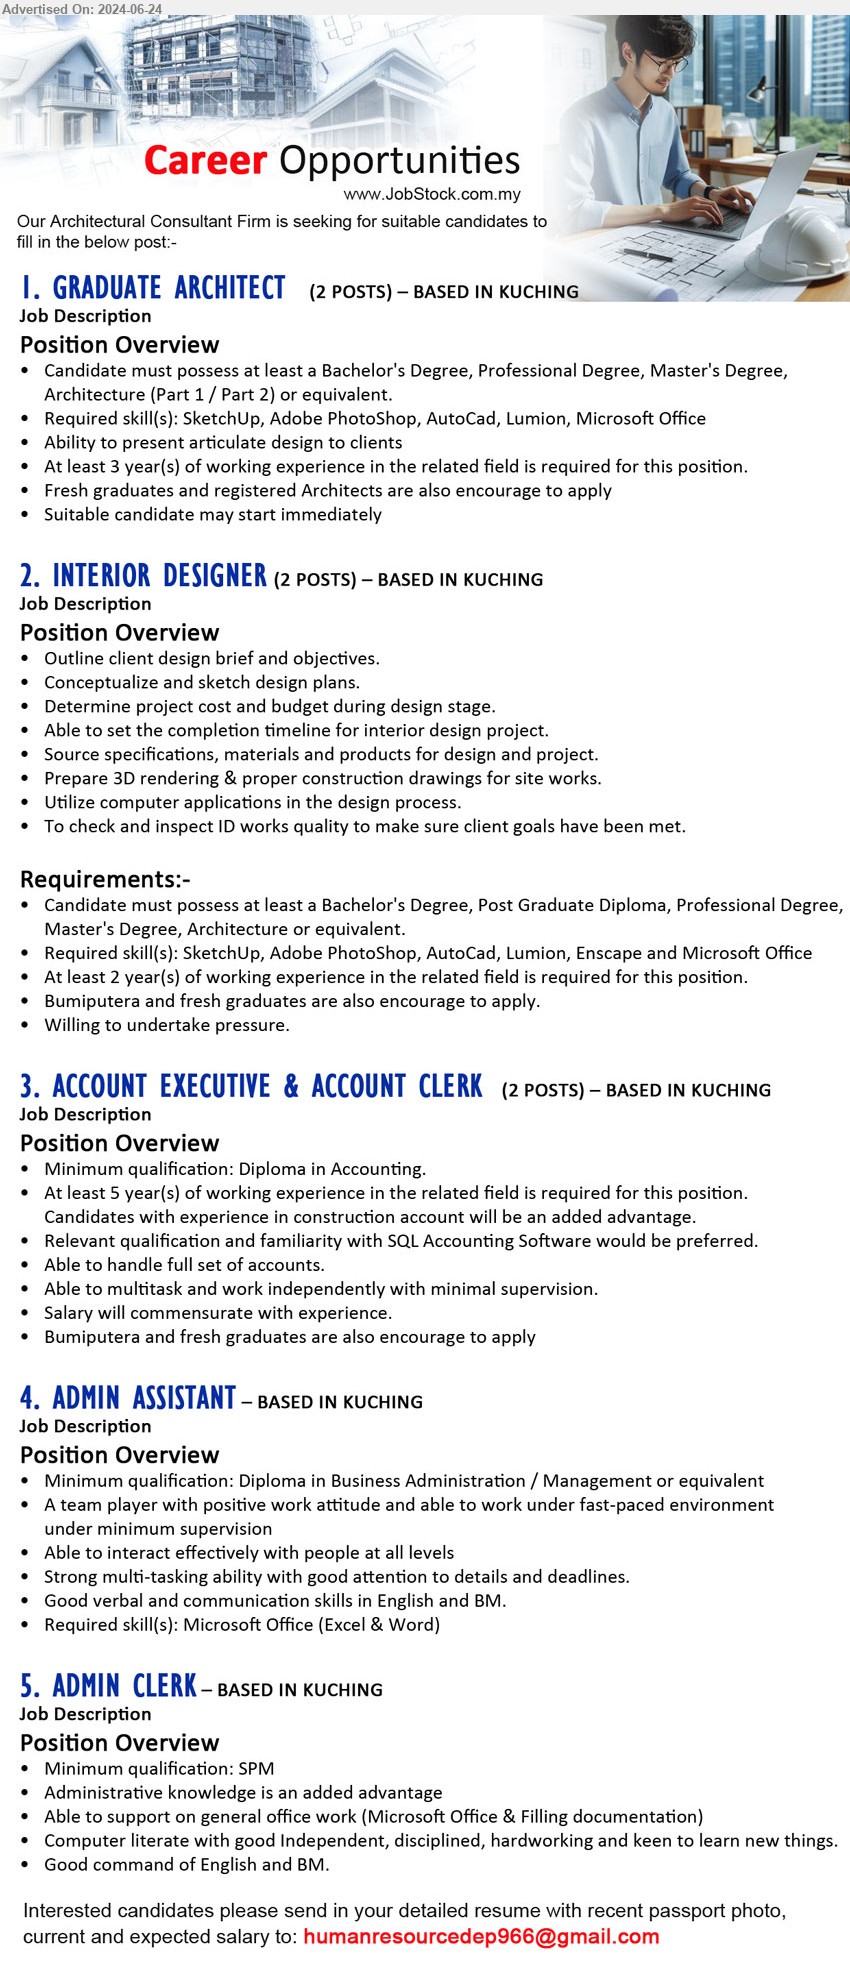 ADVERTISER (Architectural Consultant Firm) - 1. GRADUATE ARCHITECT (Kuching), Bachelor's Degree, Professional Degree, Master's Degree, Architecture (Part 1 / Part 2) ,...
2. INTERIOR DESIGNER (Kuching), Bachelor's Degree, Post Graduate Diploma, Professional Degree, Master's Degree, Architecture,...
3. ACCOUNT EXECUTIVE & ACCOUNT CLERK (Kuching), Diploma in Accounting, At least 5 yrs. exp.,...
4. ADMIN ASSISTANT  (Kuching), Diploma in Business Administration / Management,...
5. ADMIN CLERK (Kuching), SPM, Administrative knowledge is an added advantage,...
Email resume to ...